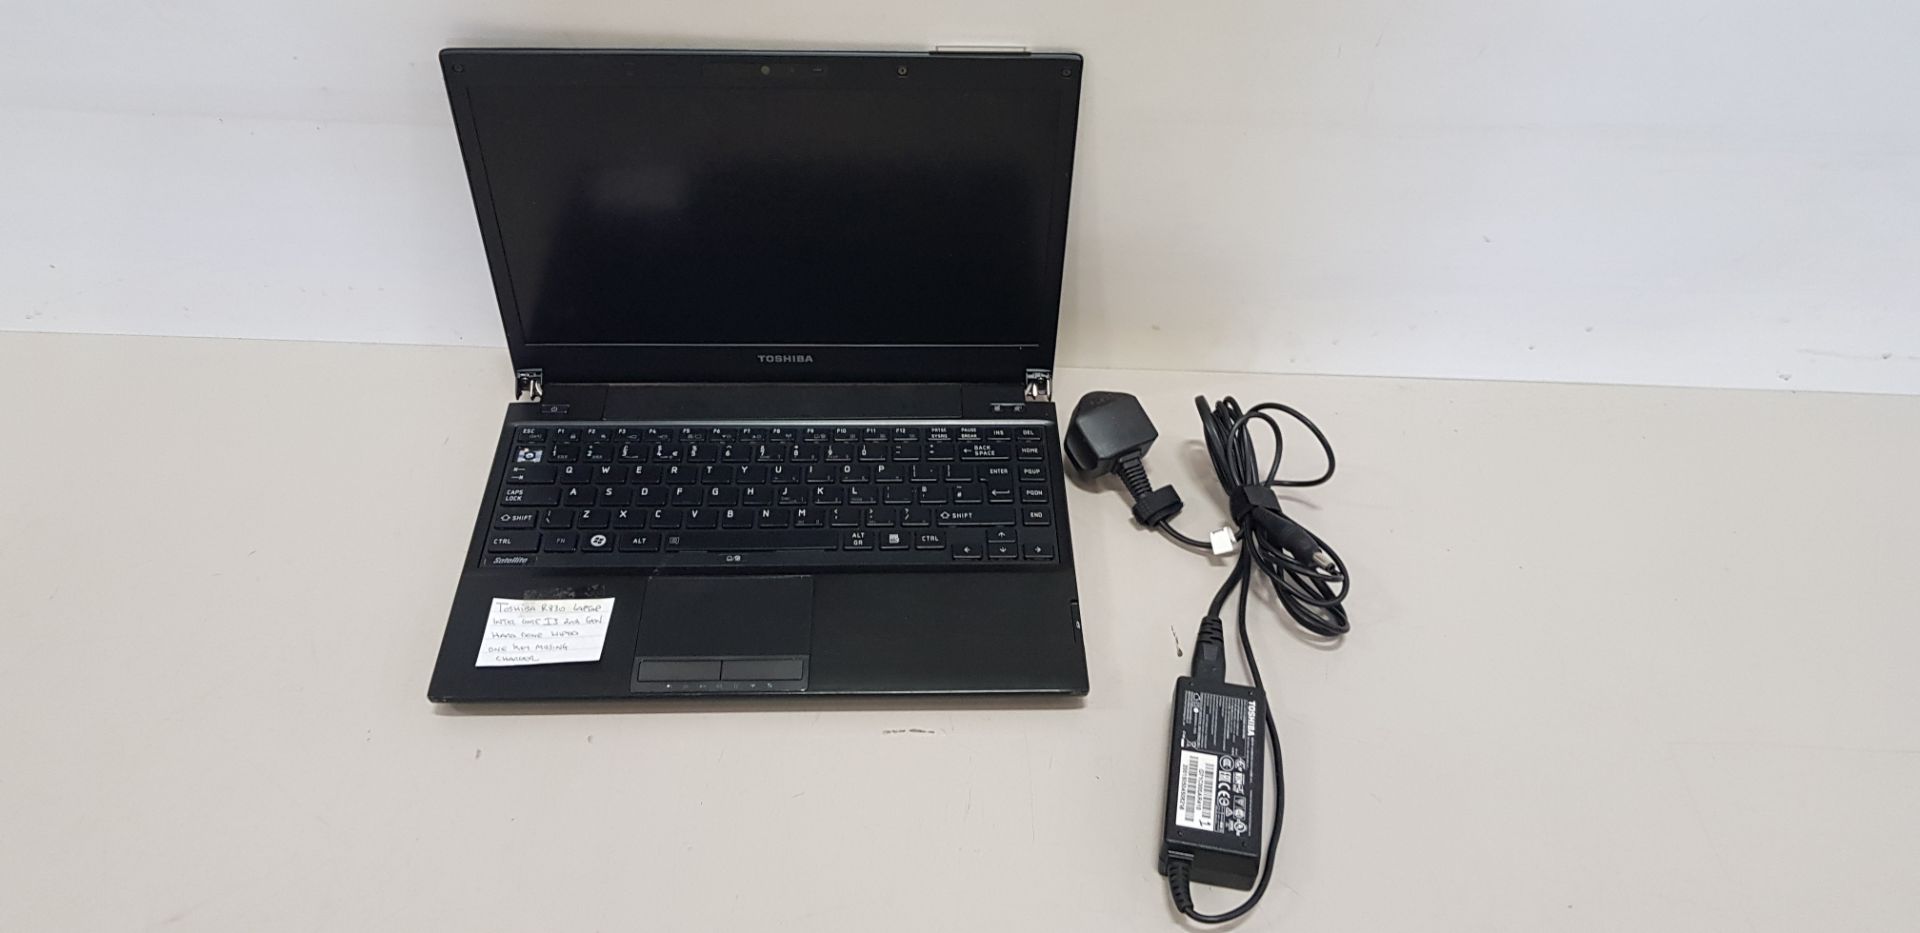 TOSHIBA R830 LAPTOP - INTEL CORE I3 2ND GEN - HARD DRIVE WIPED - COMES WITH CHARGER ( PLEASE NOTE